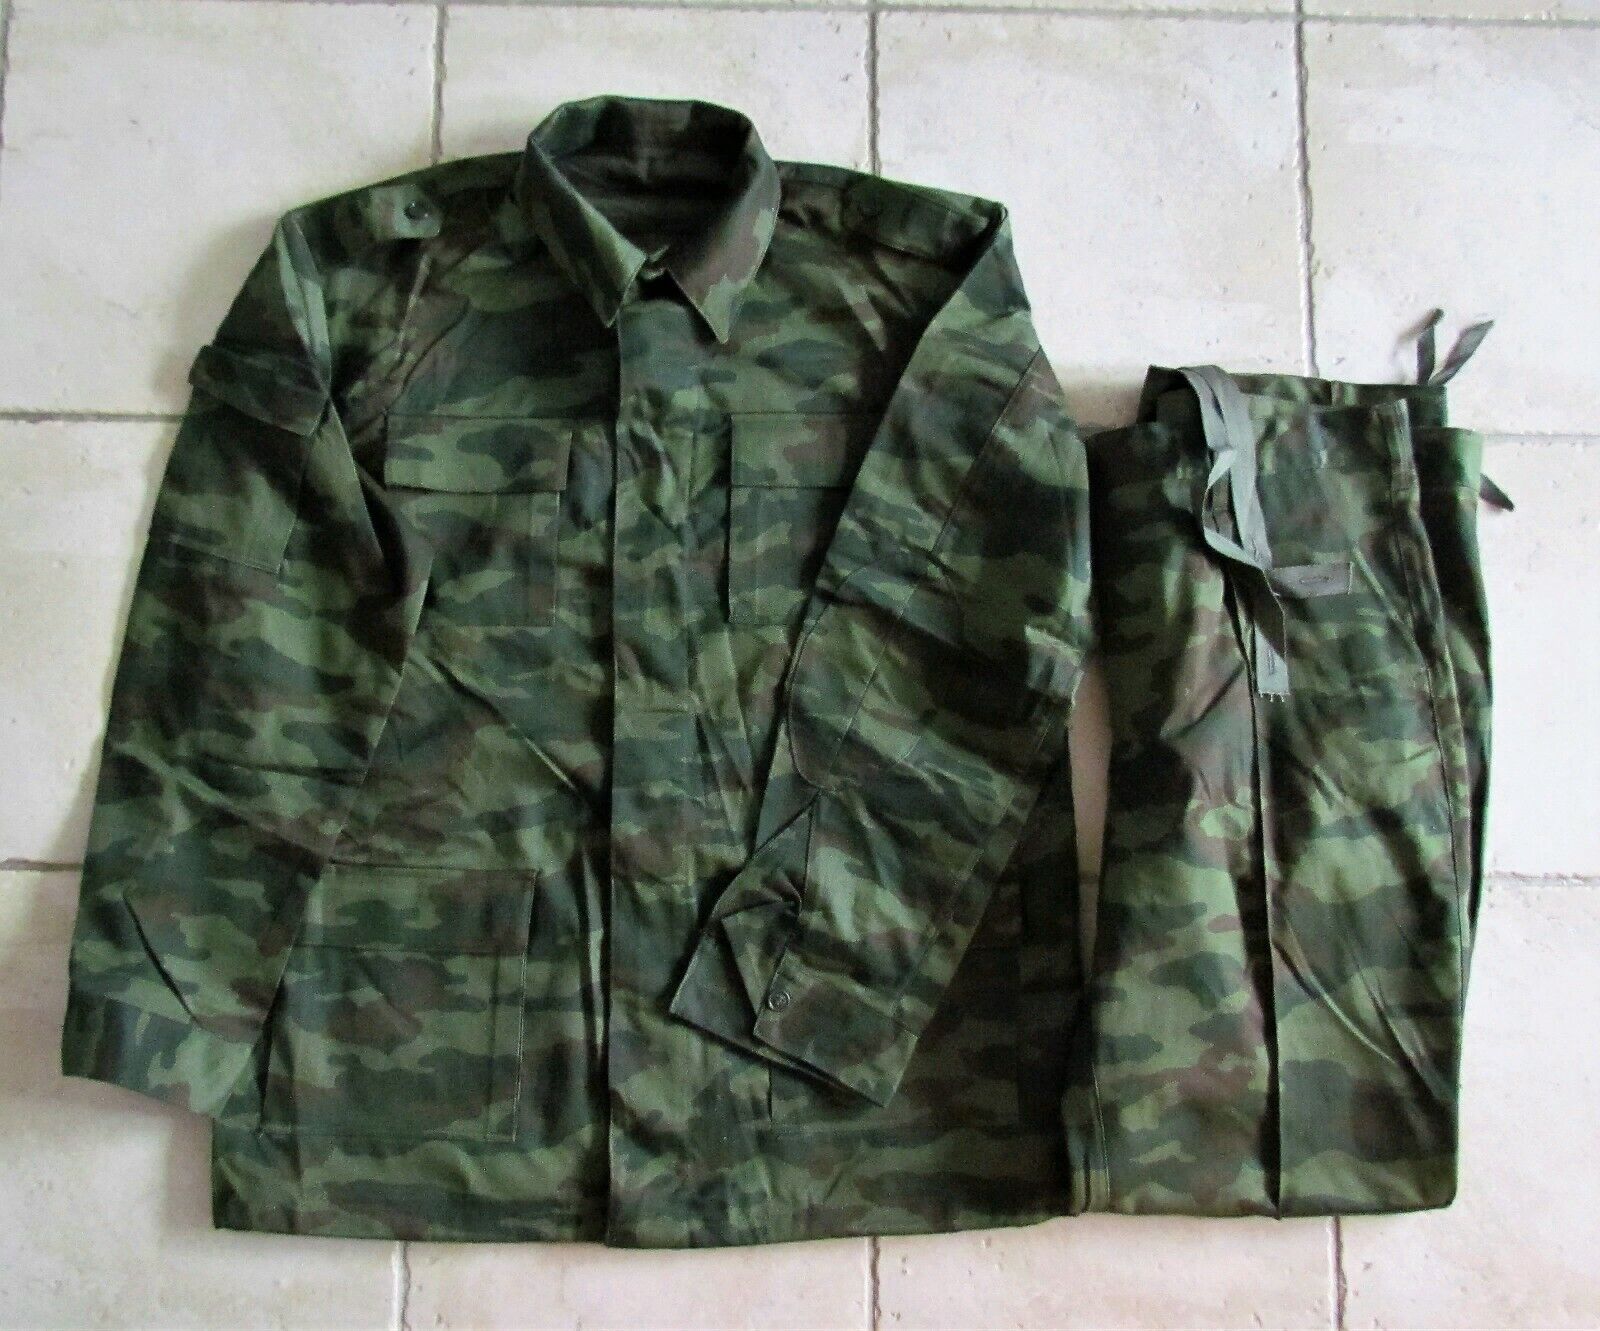 uniform 54/6 56/6 of a soldier of the Russian army flora ВСР 1998